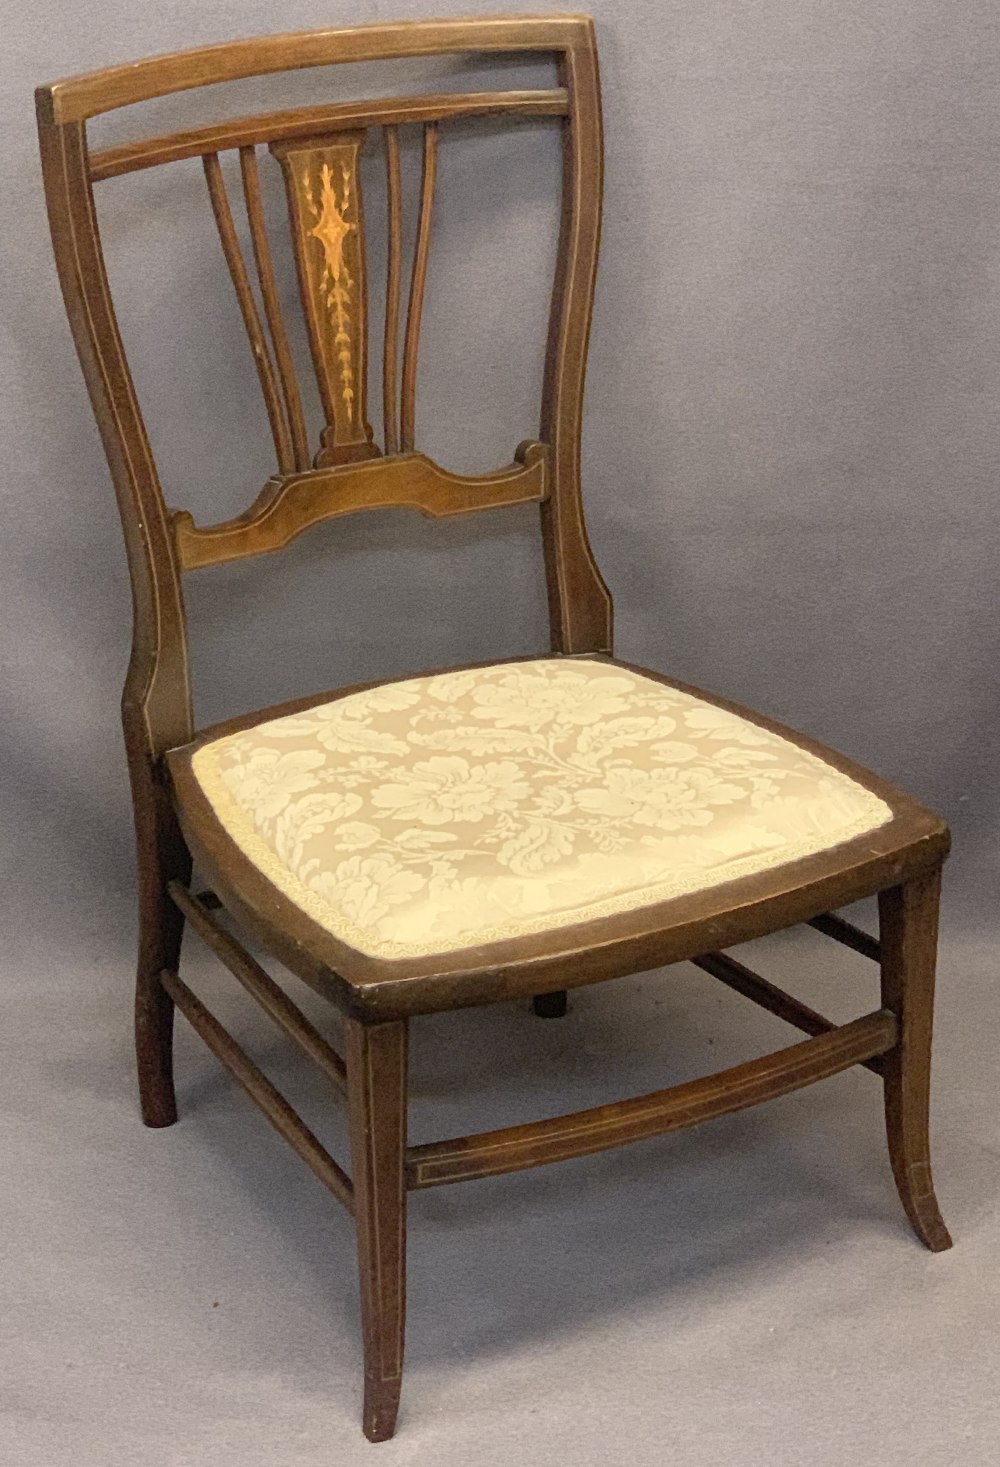 EDWARDIAN INLAID MAHOGANY NURSING CHAIR - with upholstered seat, 74cms H, 43cms W, 40cms seat D